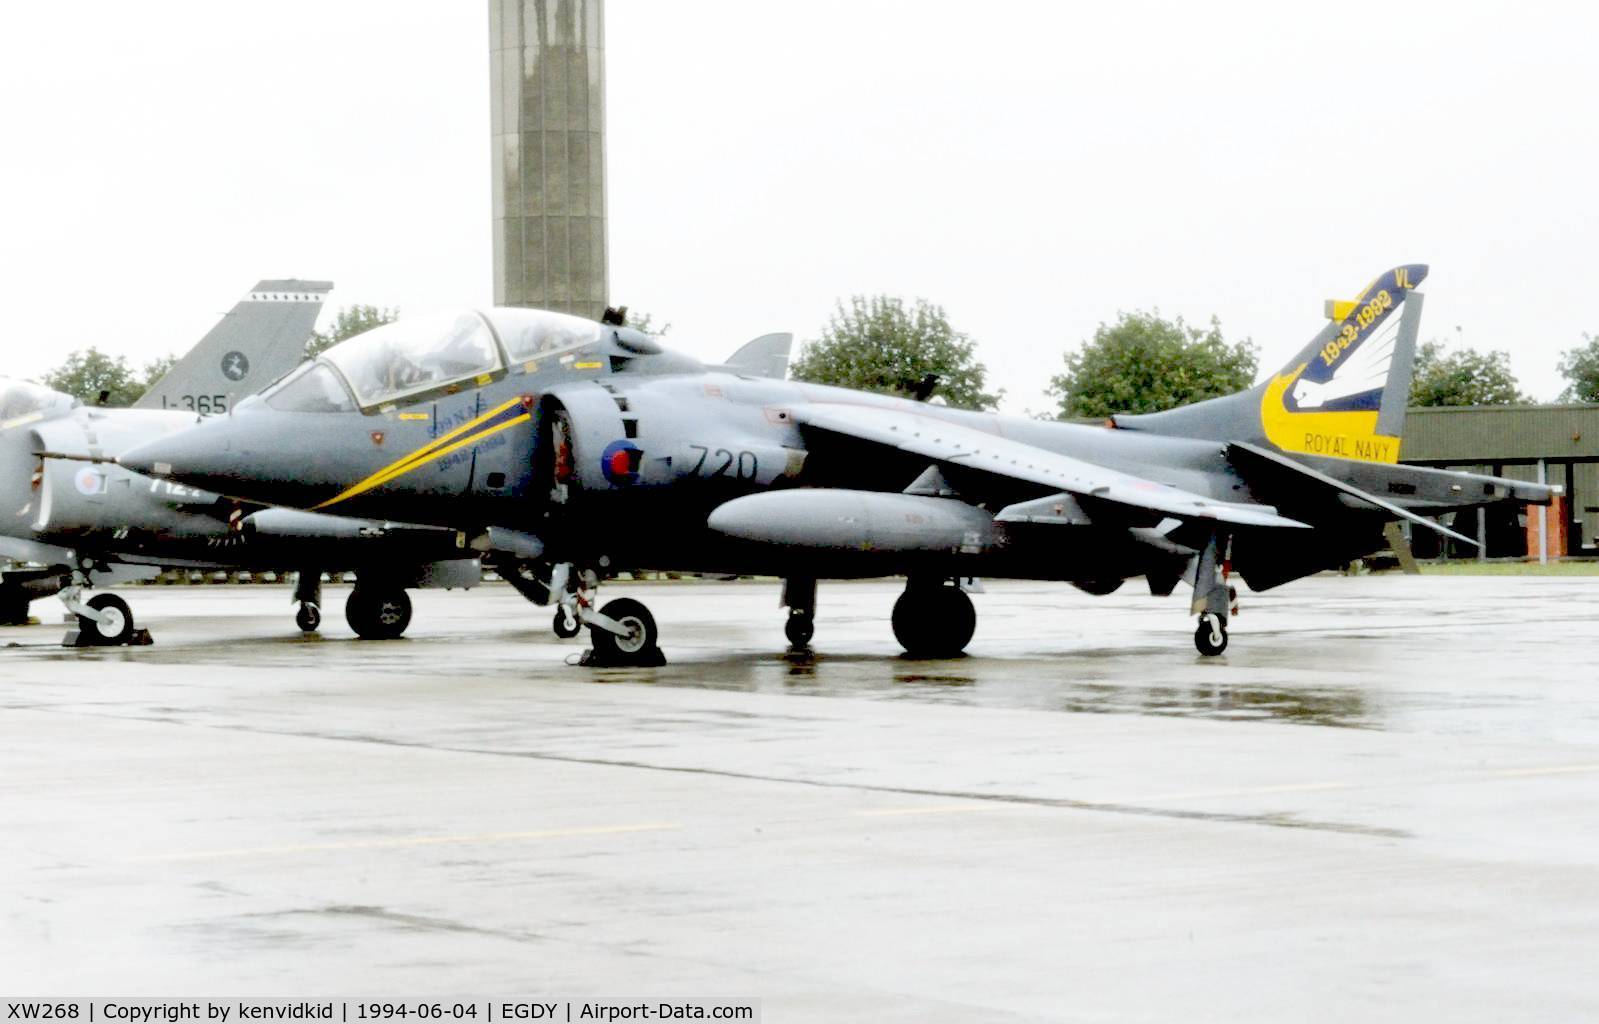 XW268, 1970 Hawker Siddeley Harrier T.4N C/N 212007, On static display at the RNAS Yeovilton 1994 50th Anniversary of D Day photocall. It rained all day.